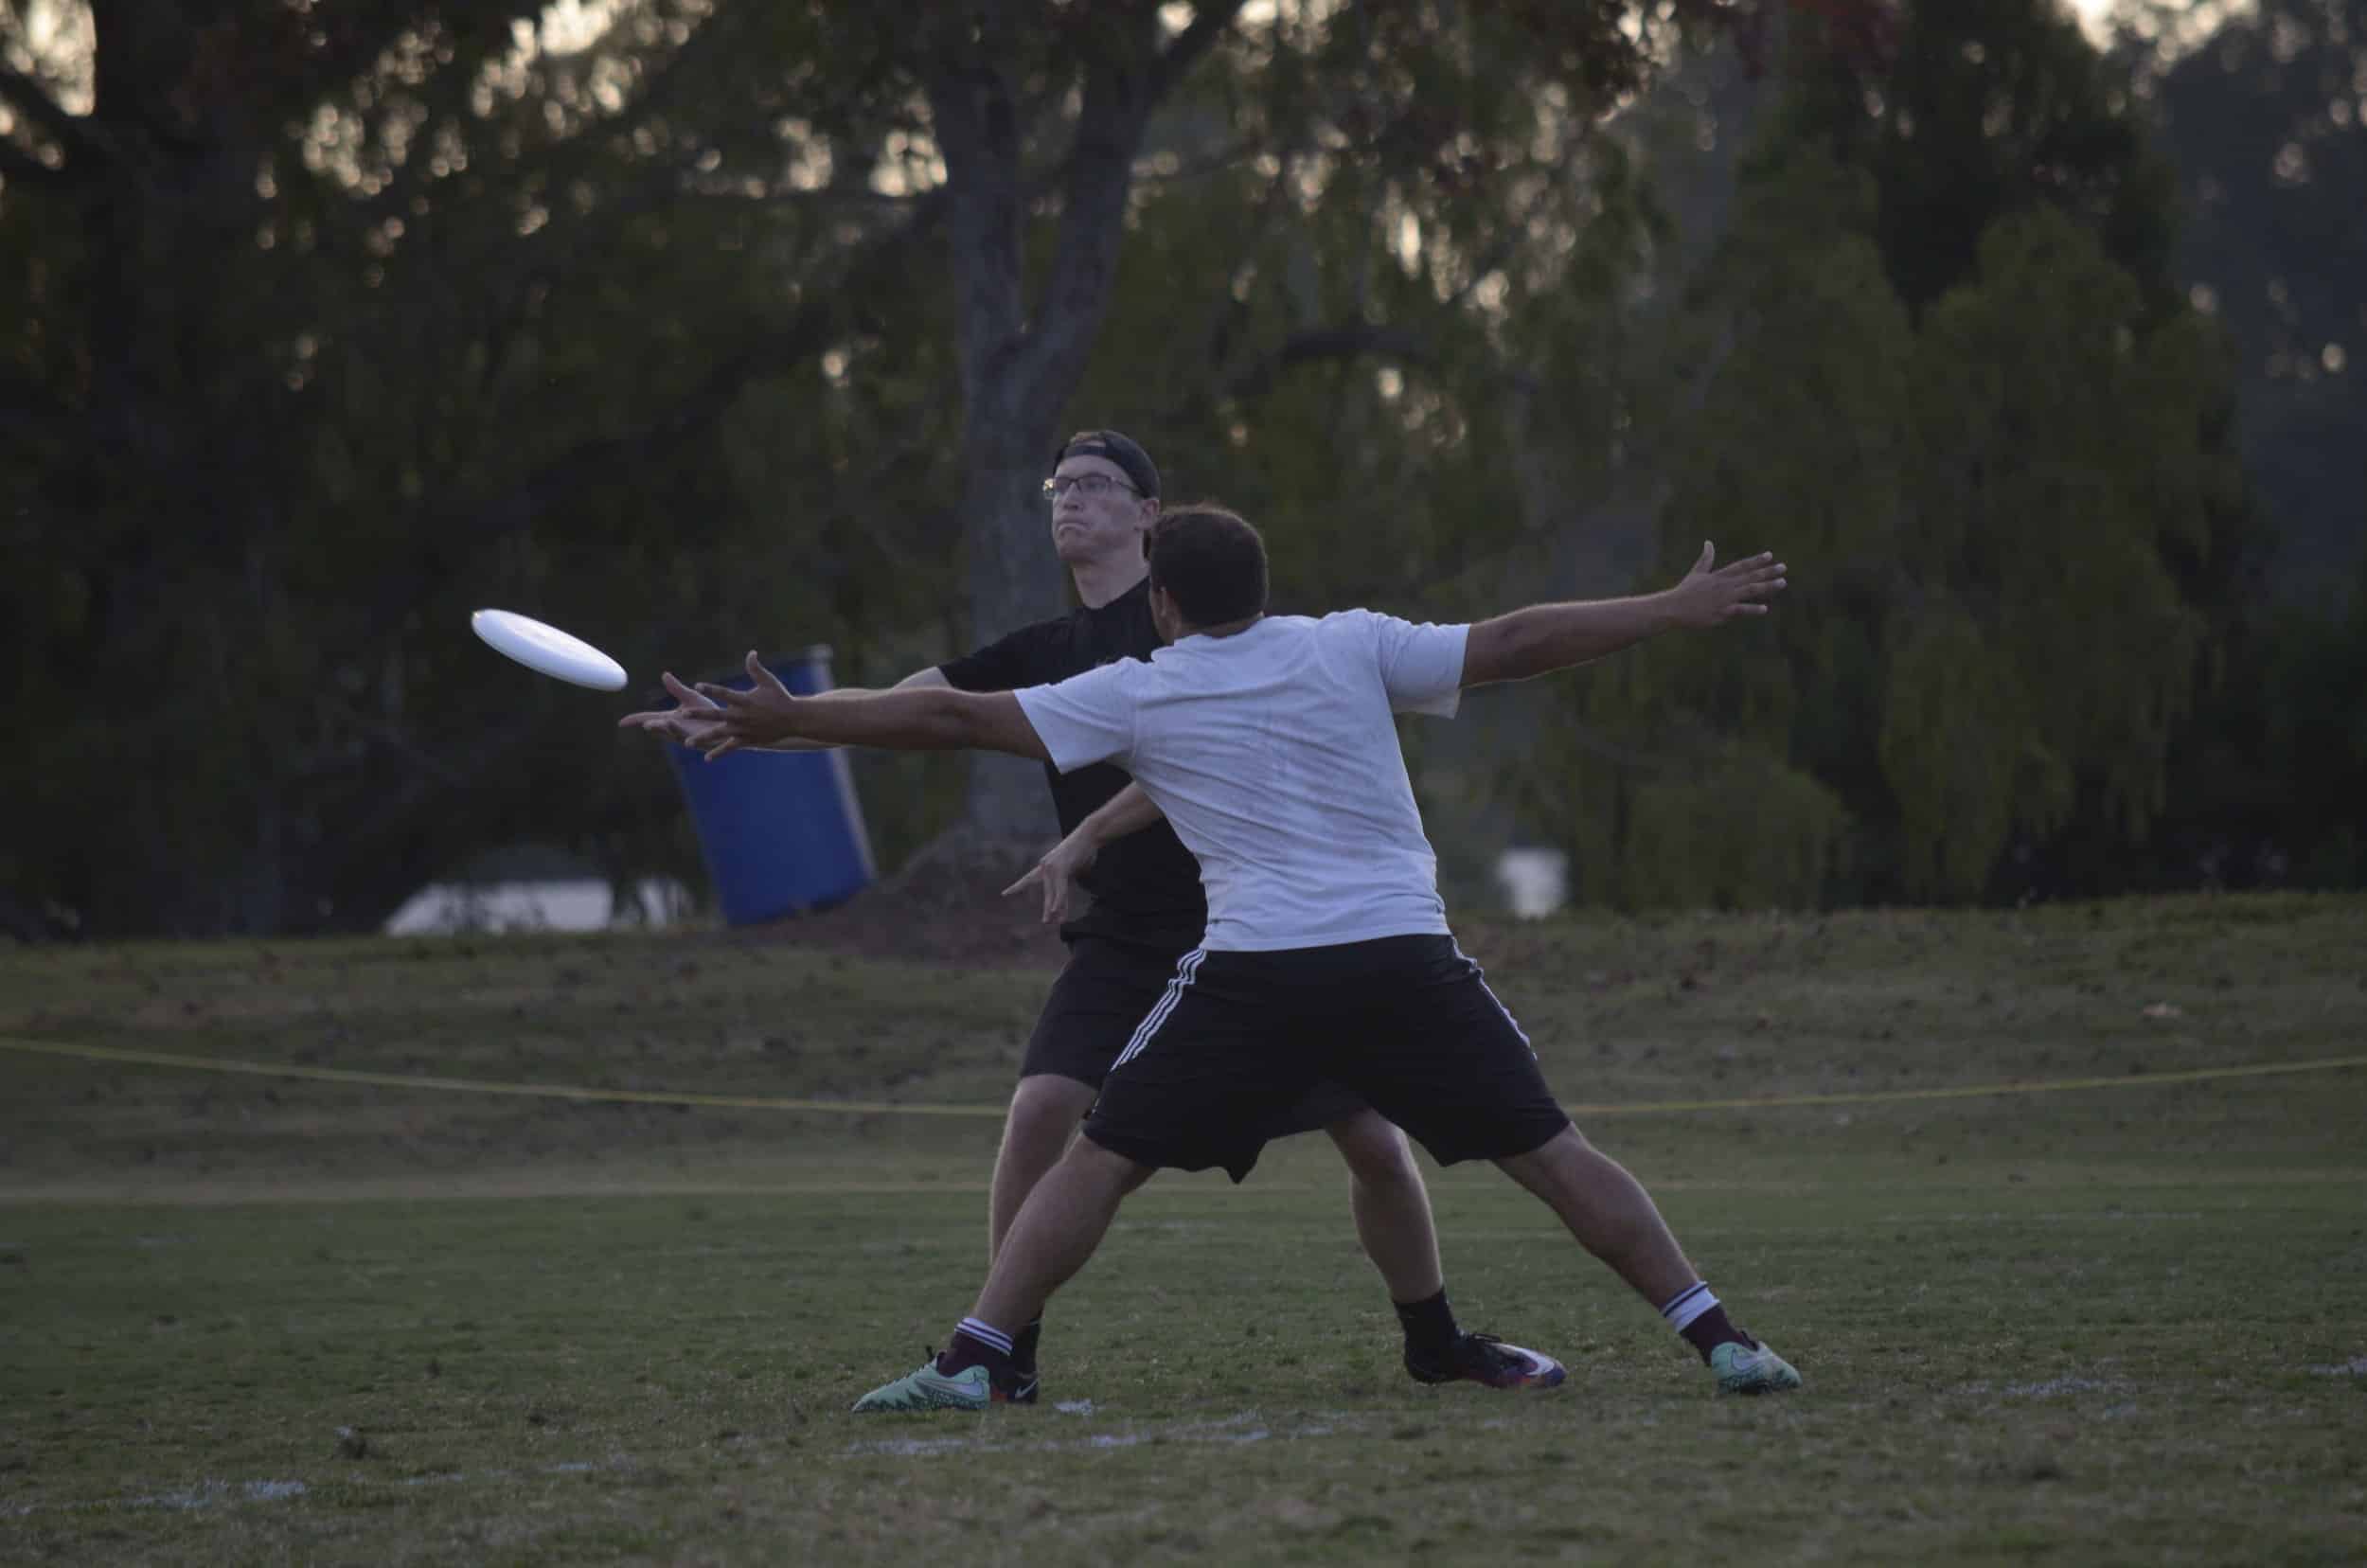 Ford Pfister passes the disc to his teammate during his first game.